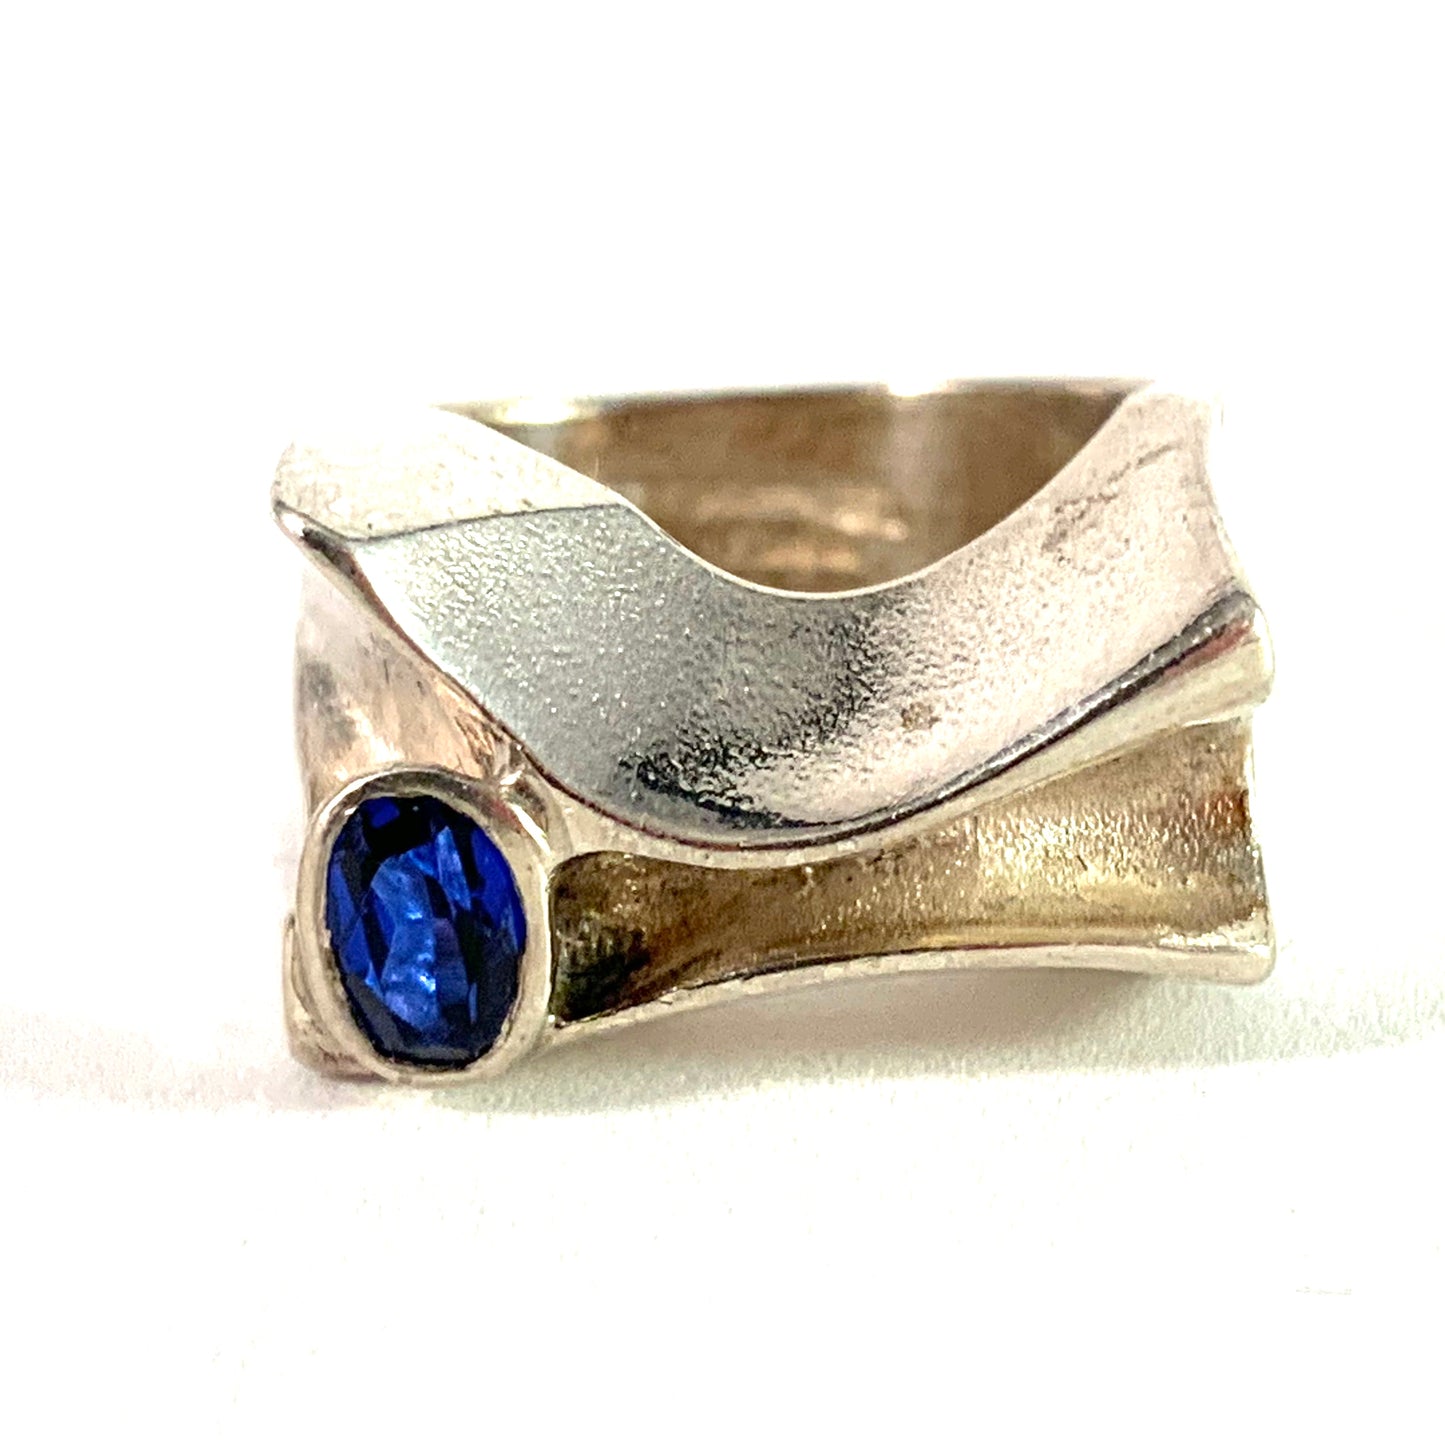 Lapponia, Finland 1980 Vintage Sterling Silver Sapphire Ring.